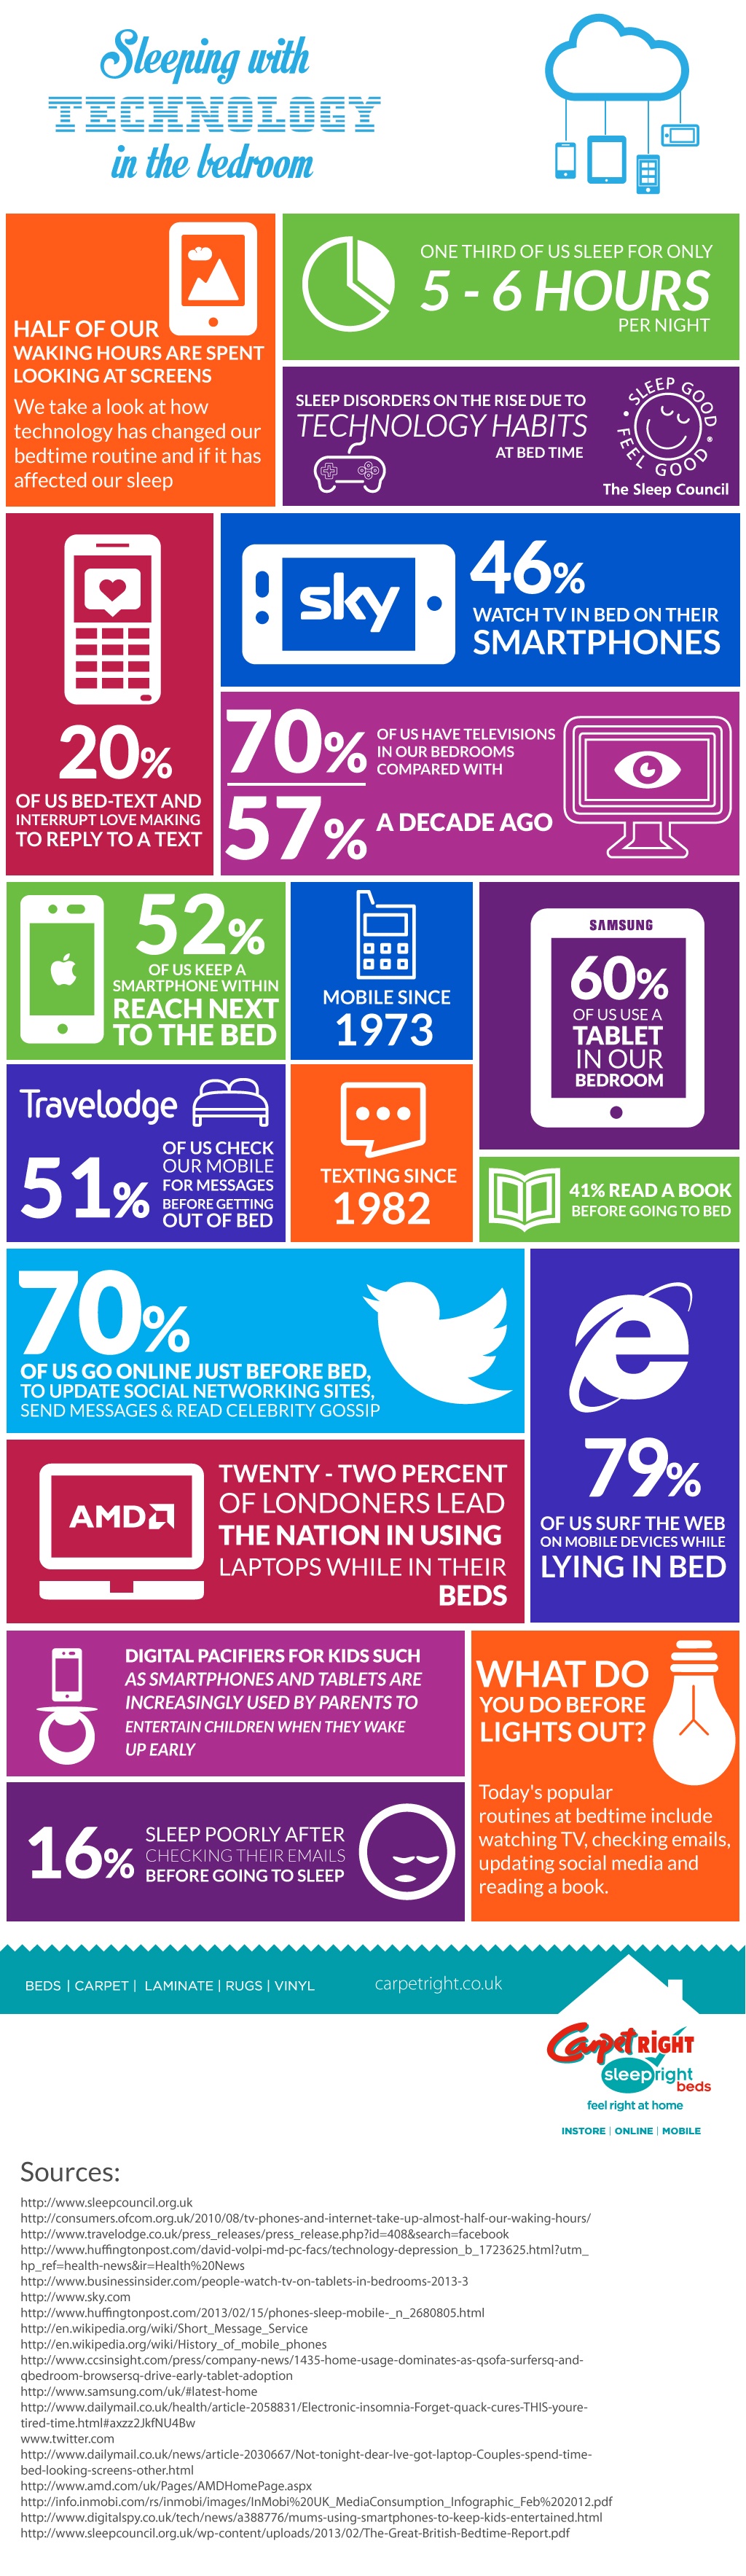 sleeping-with-technology-in-the-bedroom-infographic